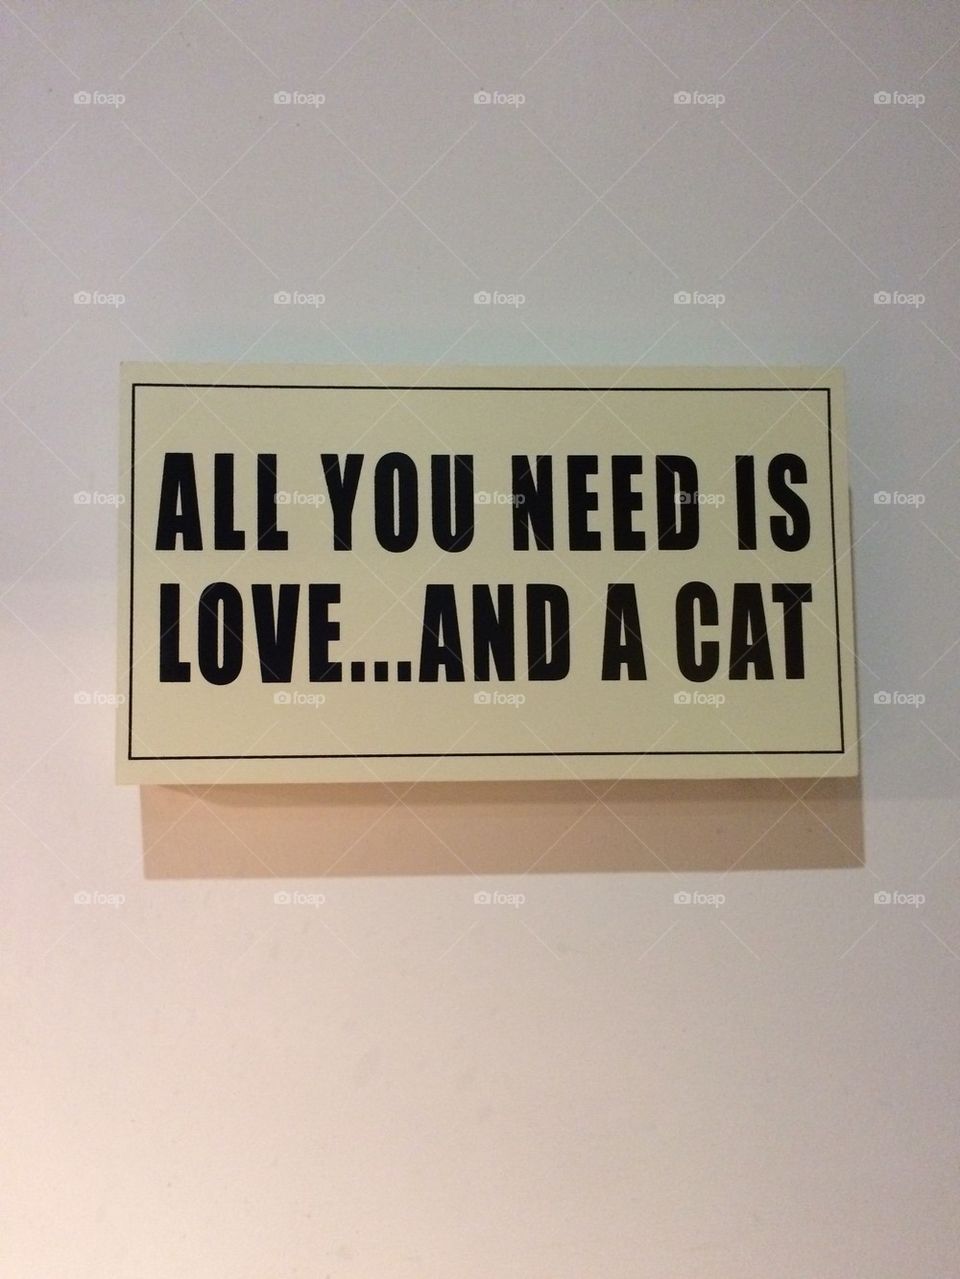 Love and a cat